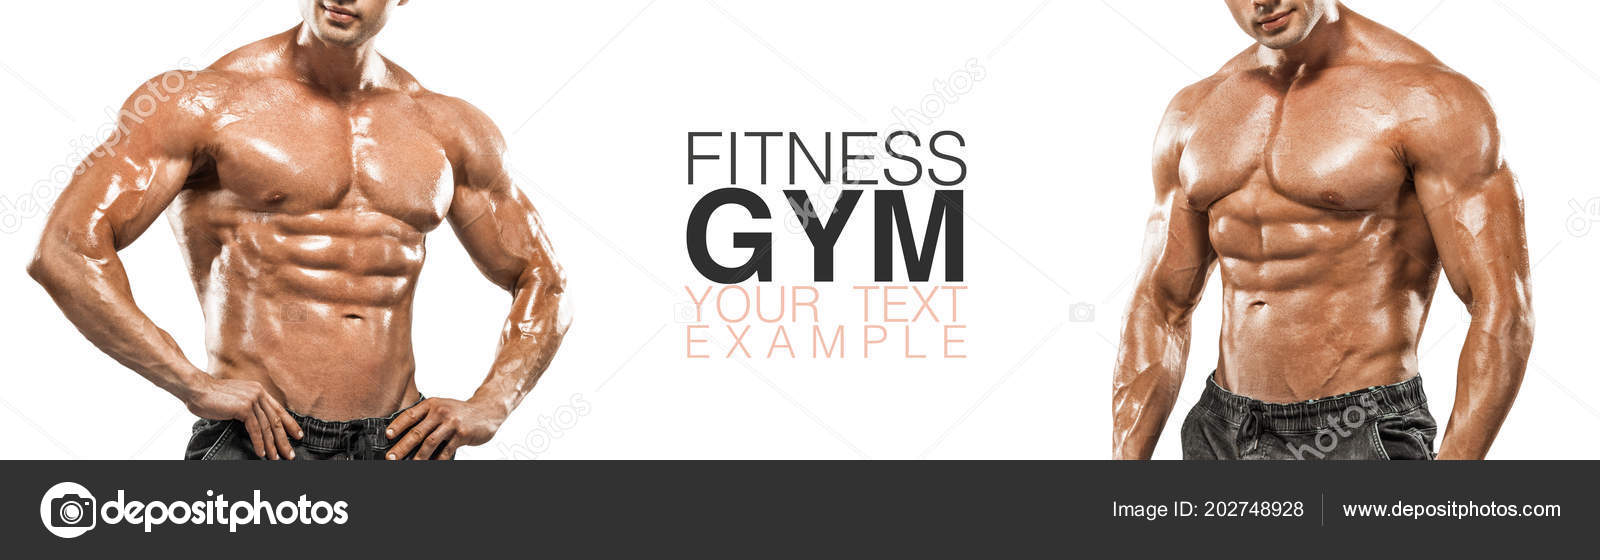 Fitness Banner Or Poster Brutal Strong Muscular Bodybuilder Athletic Man Pumping Up Muscles On White Background Workout Bodybuilding Concept Copy Space For Sport Nutrition Ads Stock Photo C Mikeorlov